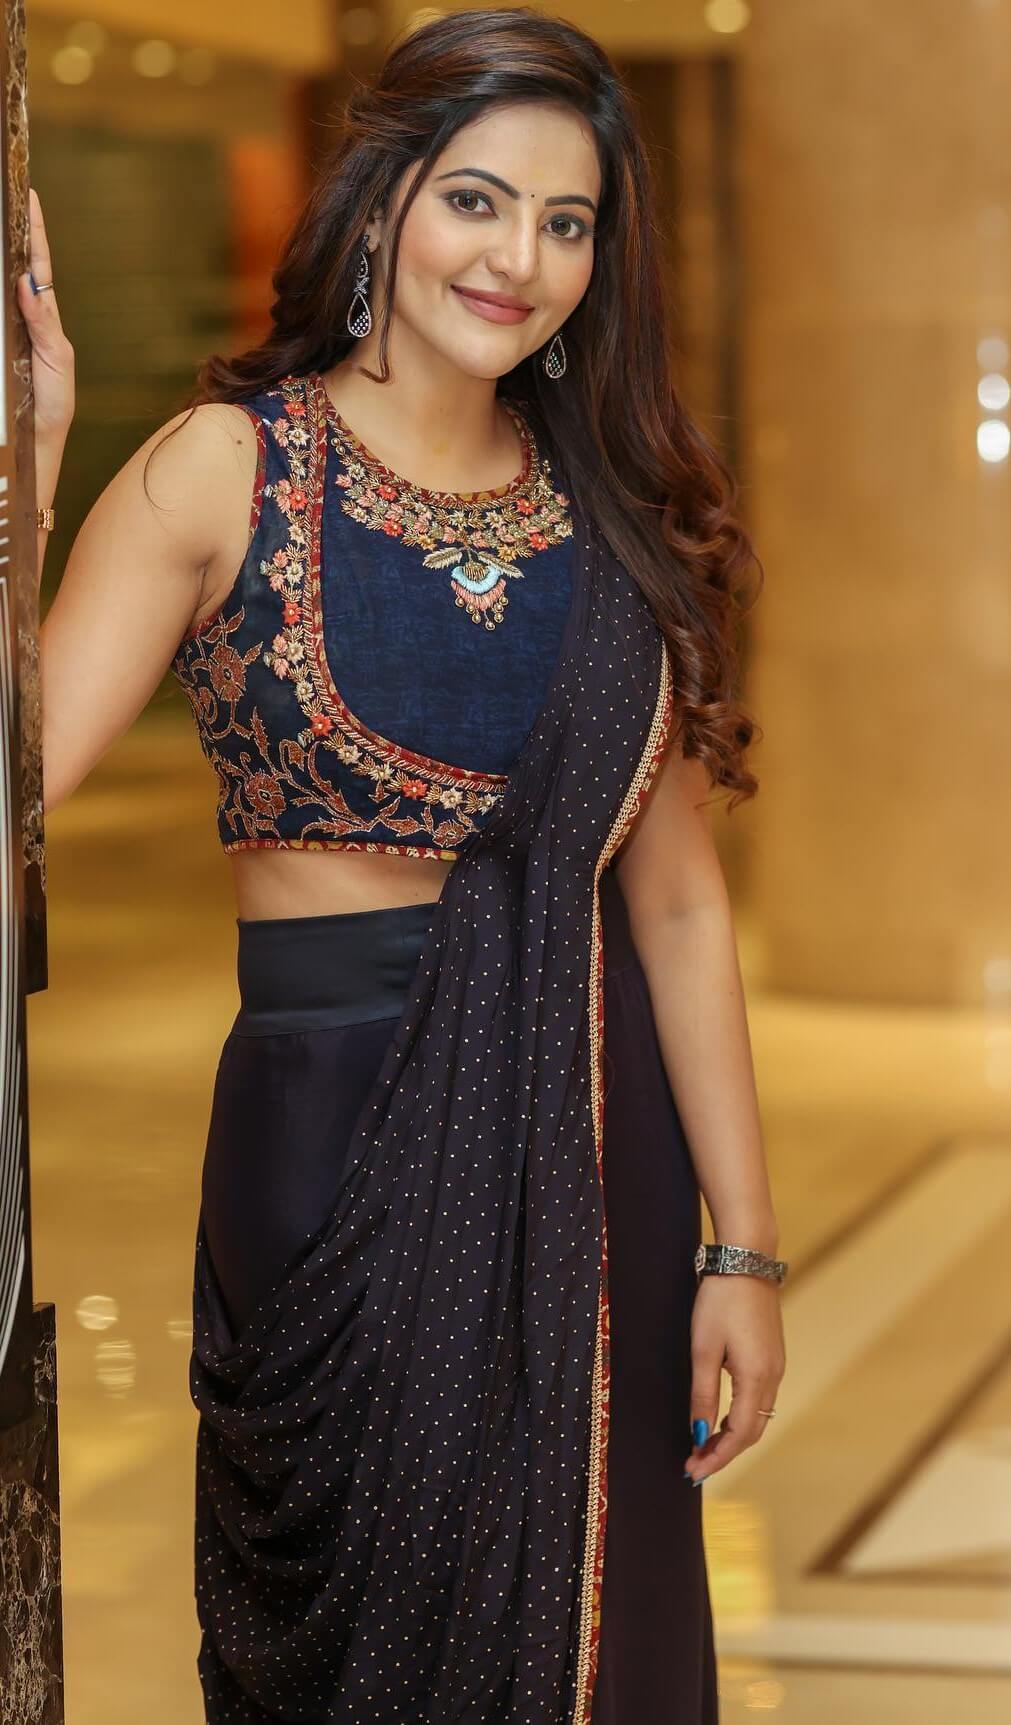 Athulya Ravi In Navy Blue Saree & Blouse Outfit